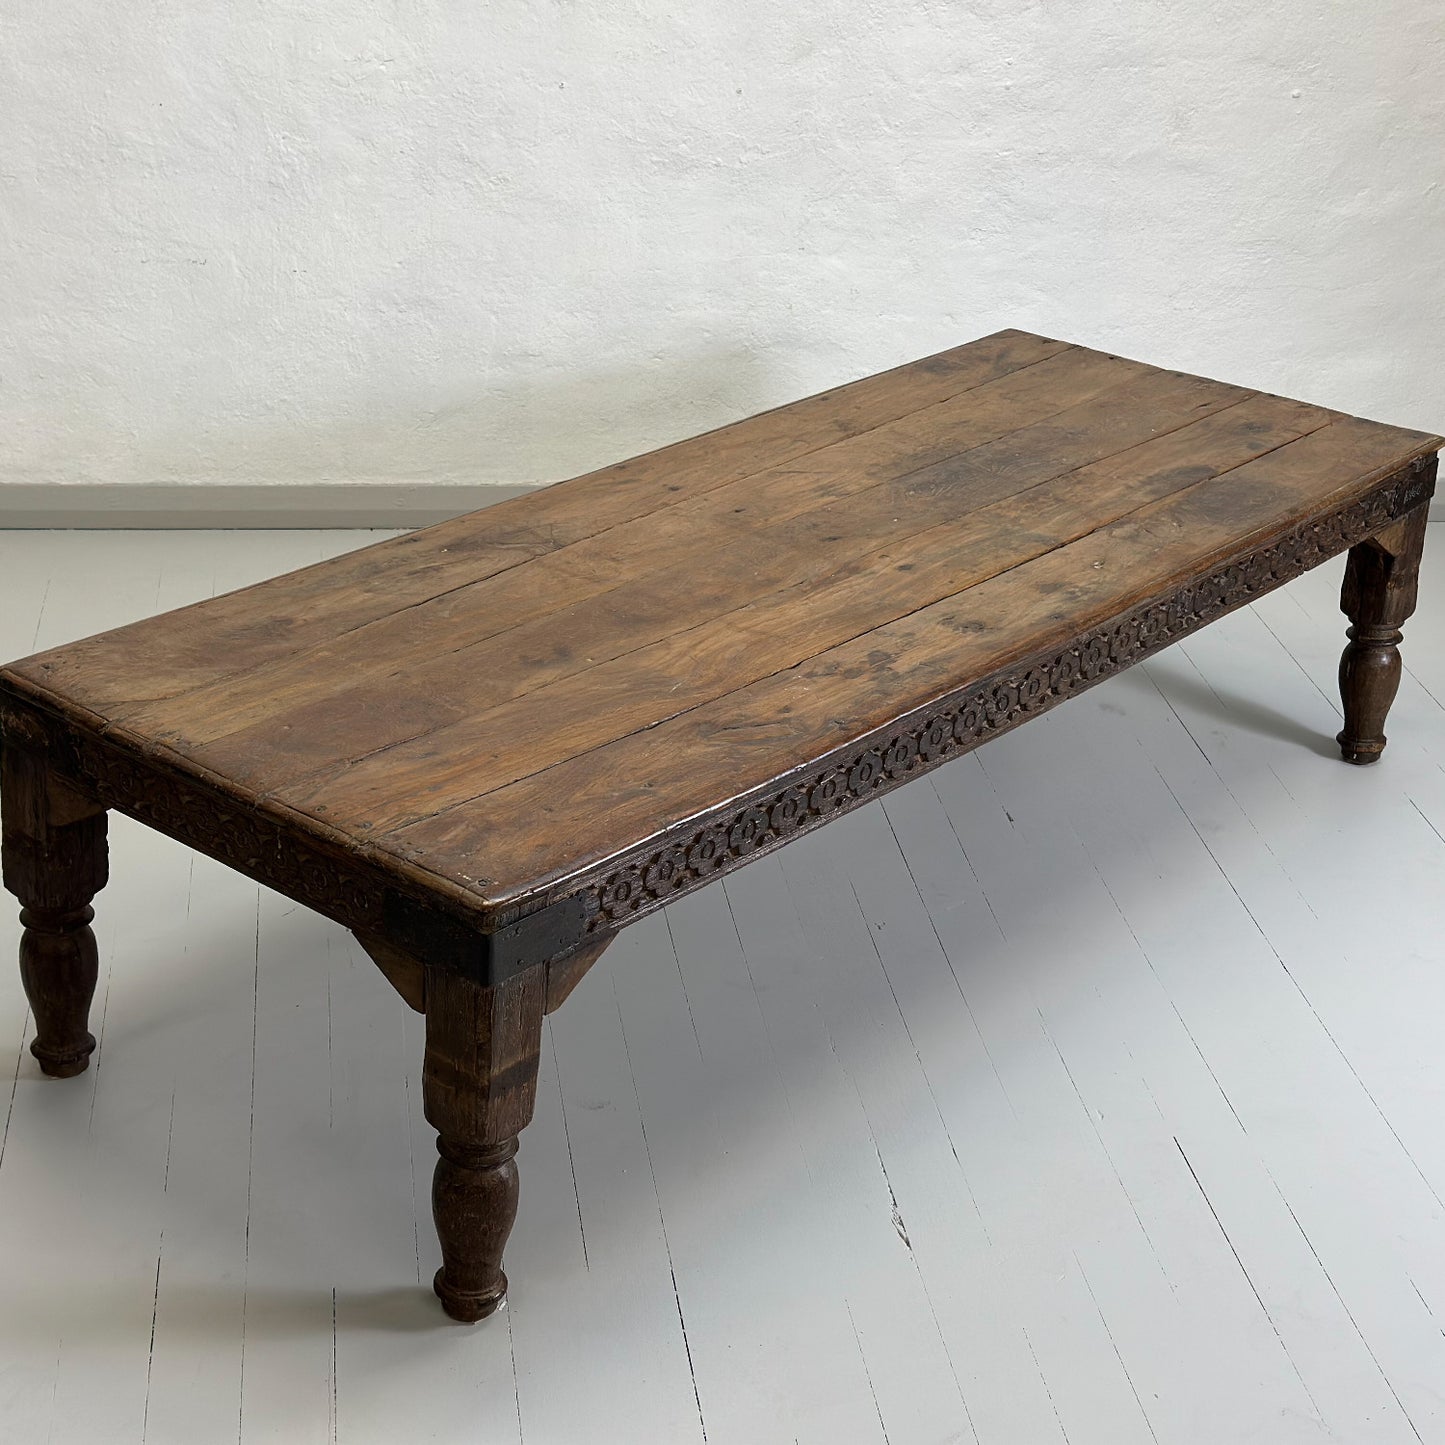 Carved Apron Coffee Table